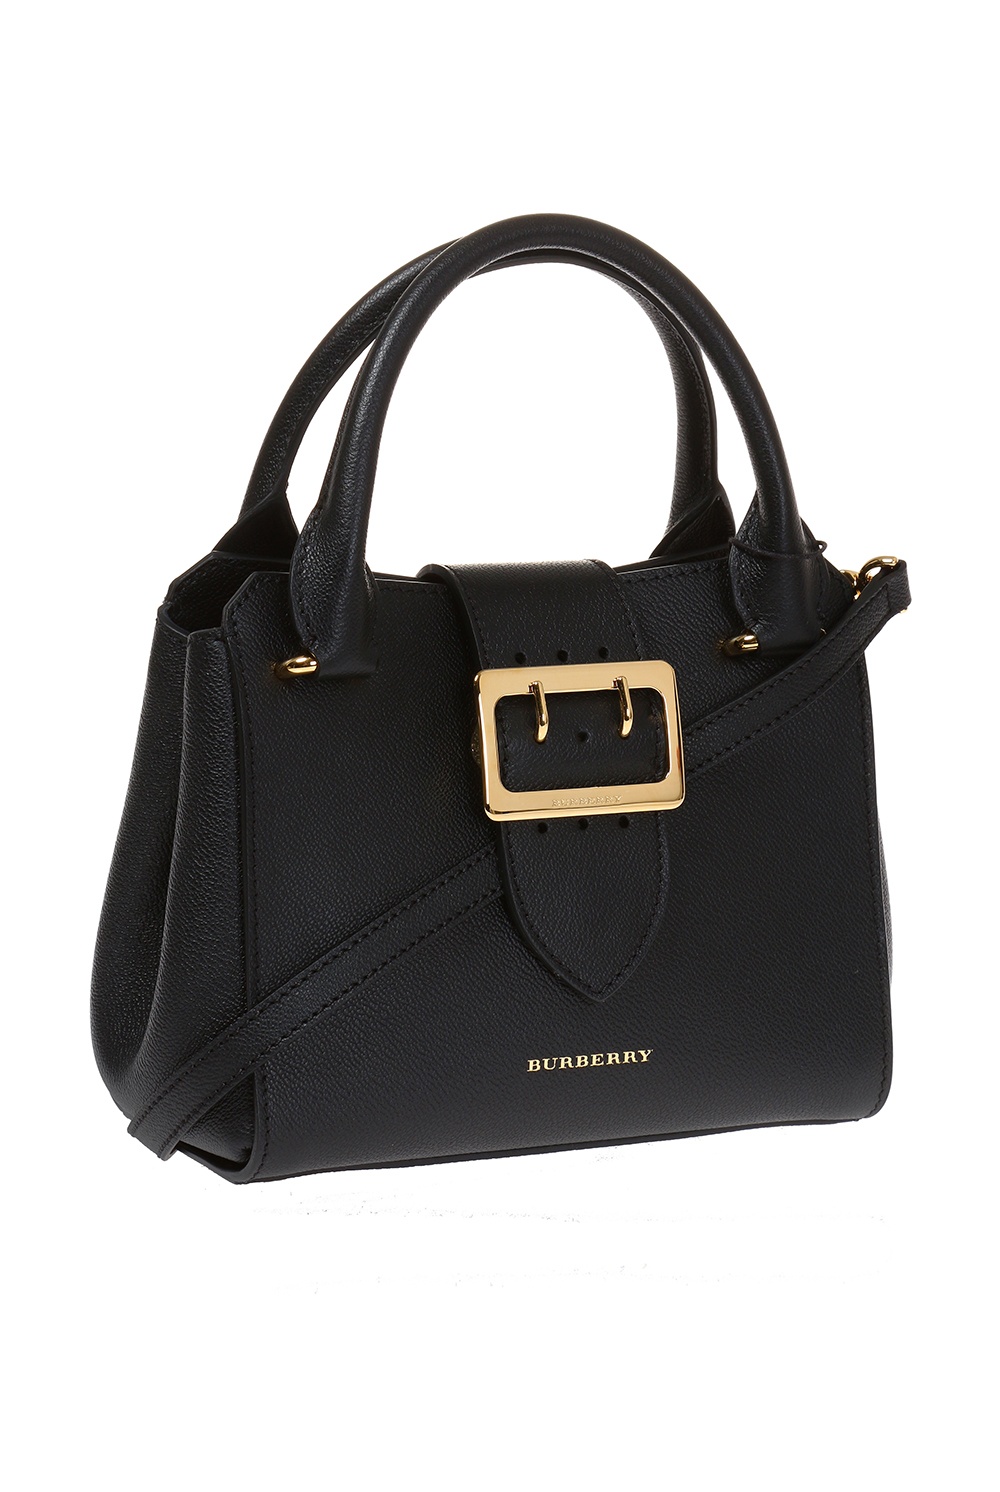 Burberry Small Buckle Tote Bag